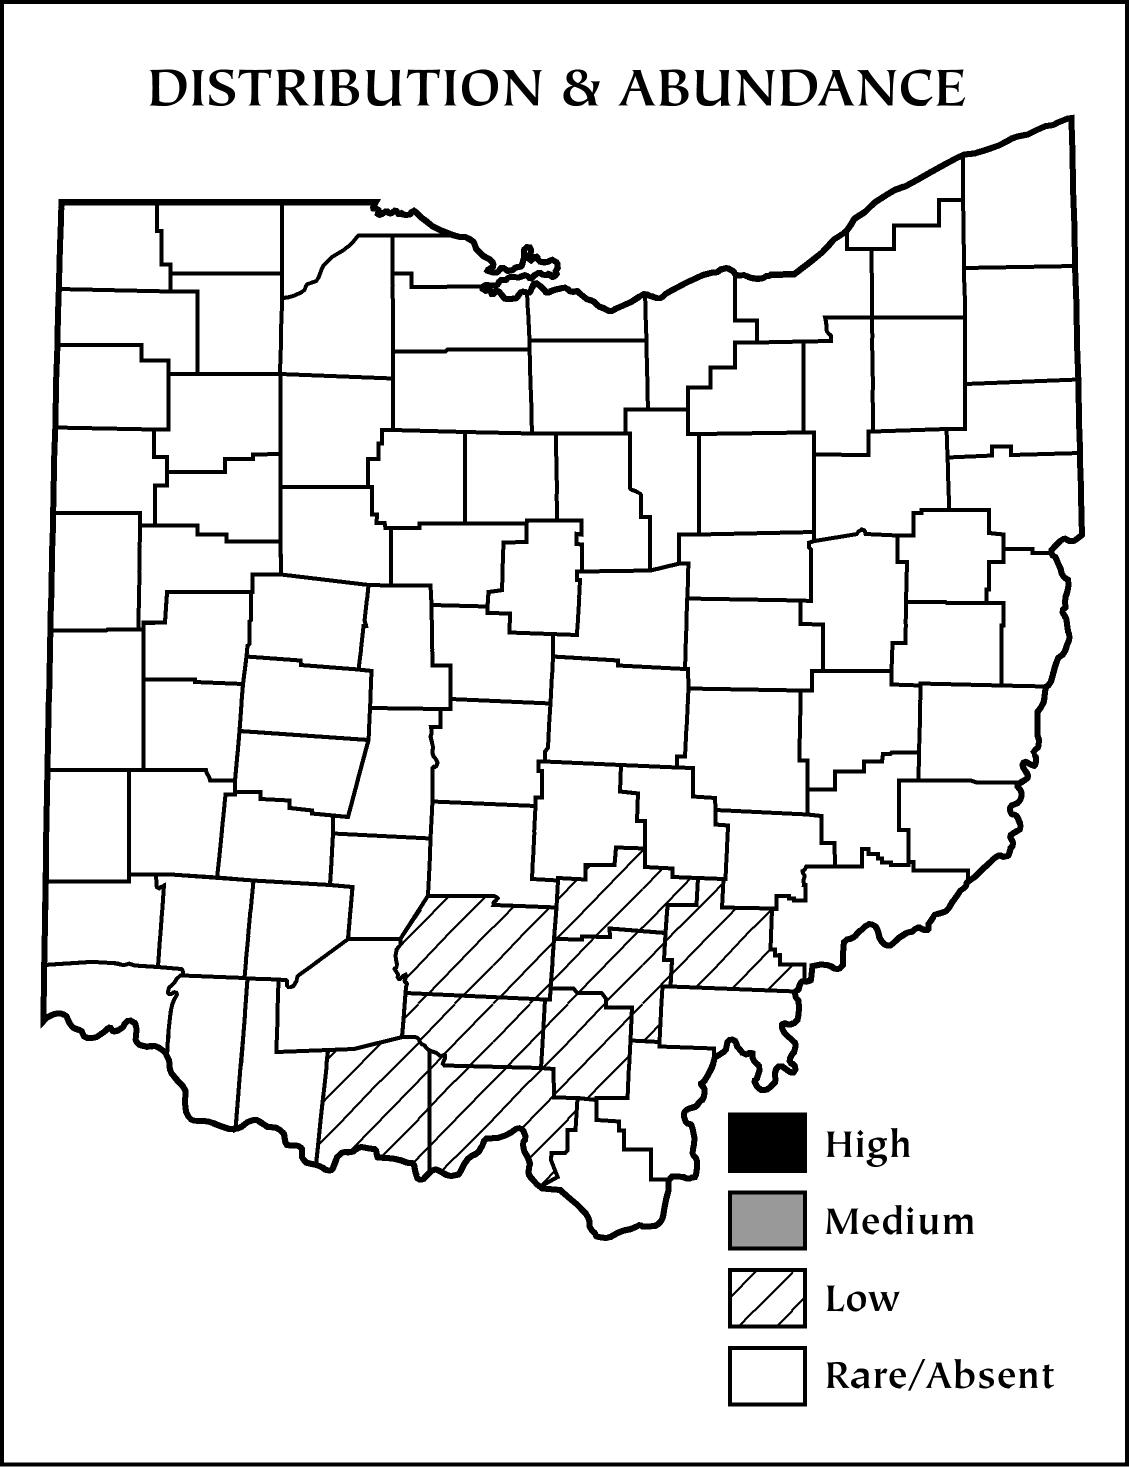 venomous snakes in ohio map On The Subject Of Nature Timber Rattlesnake venomous snakes in ohio map